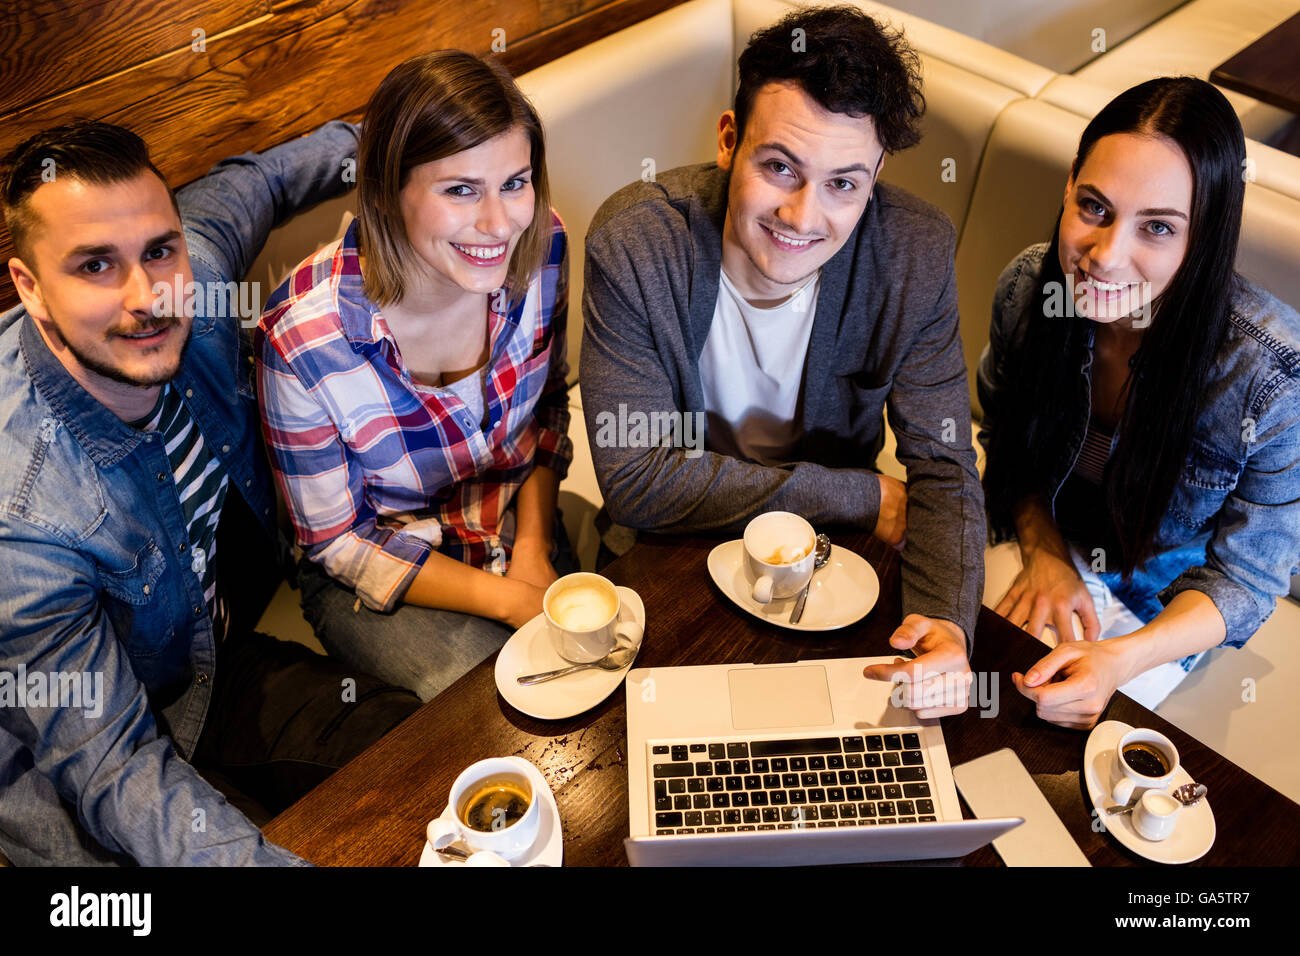 High angle view friends using laptop at restaurant Stock Photo